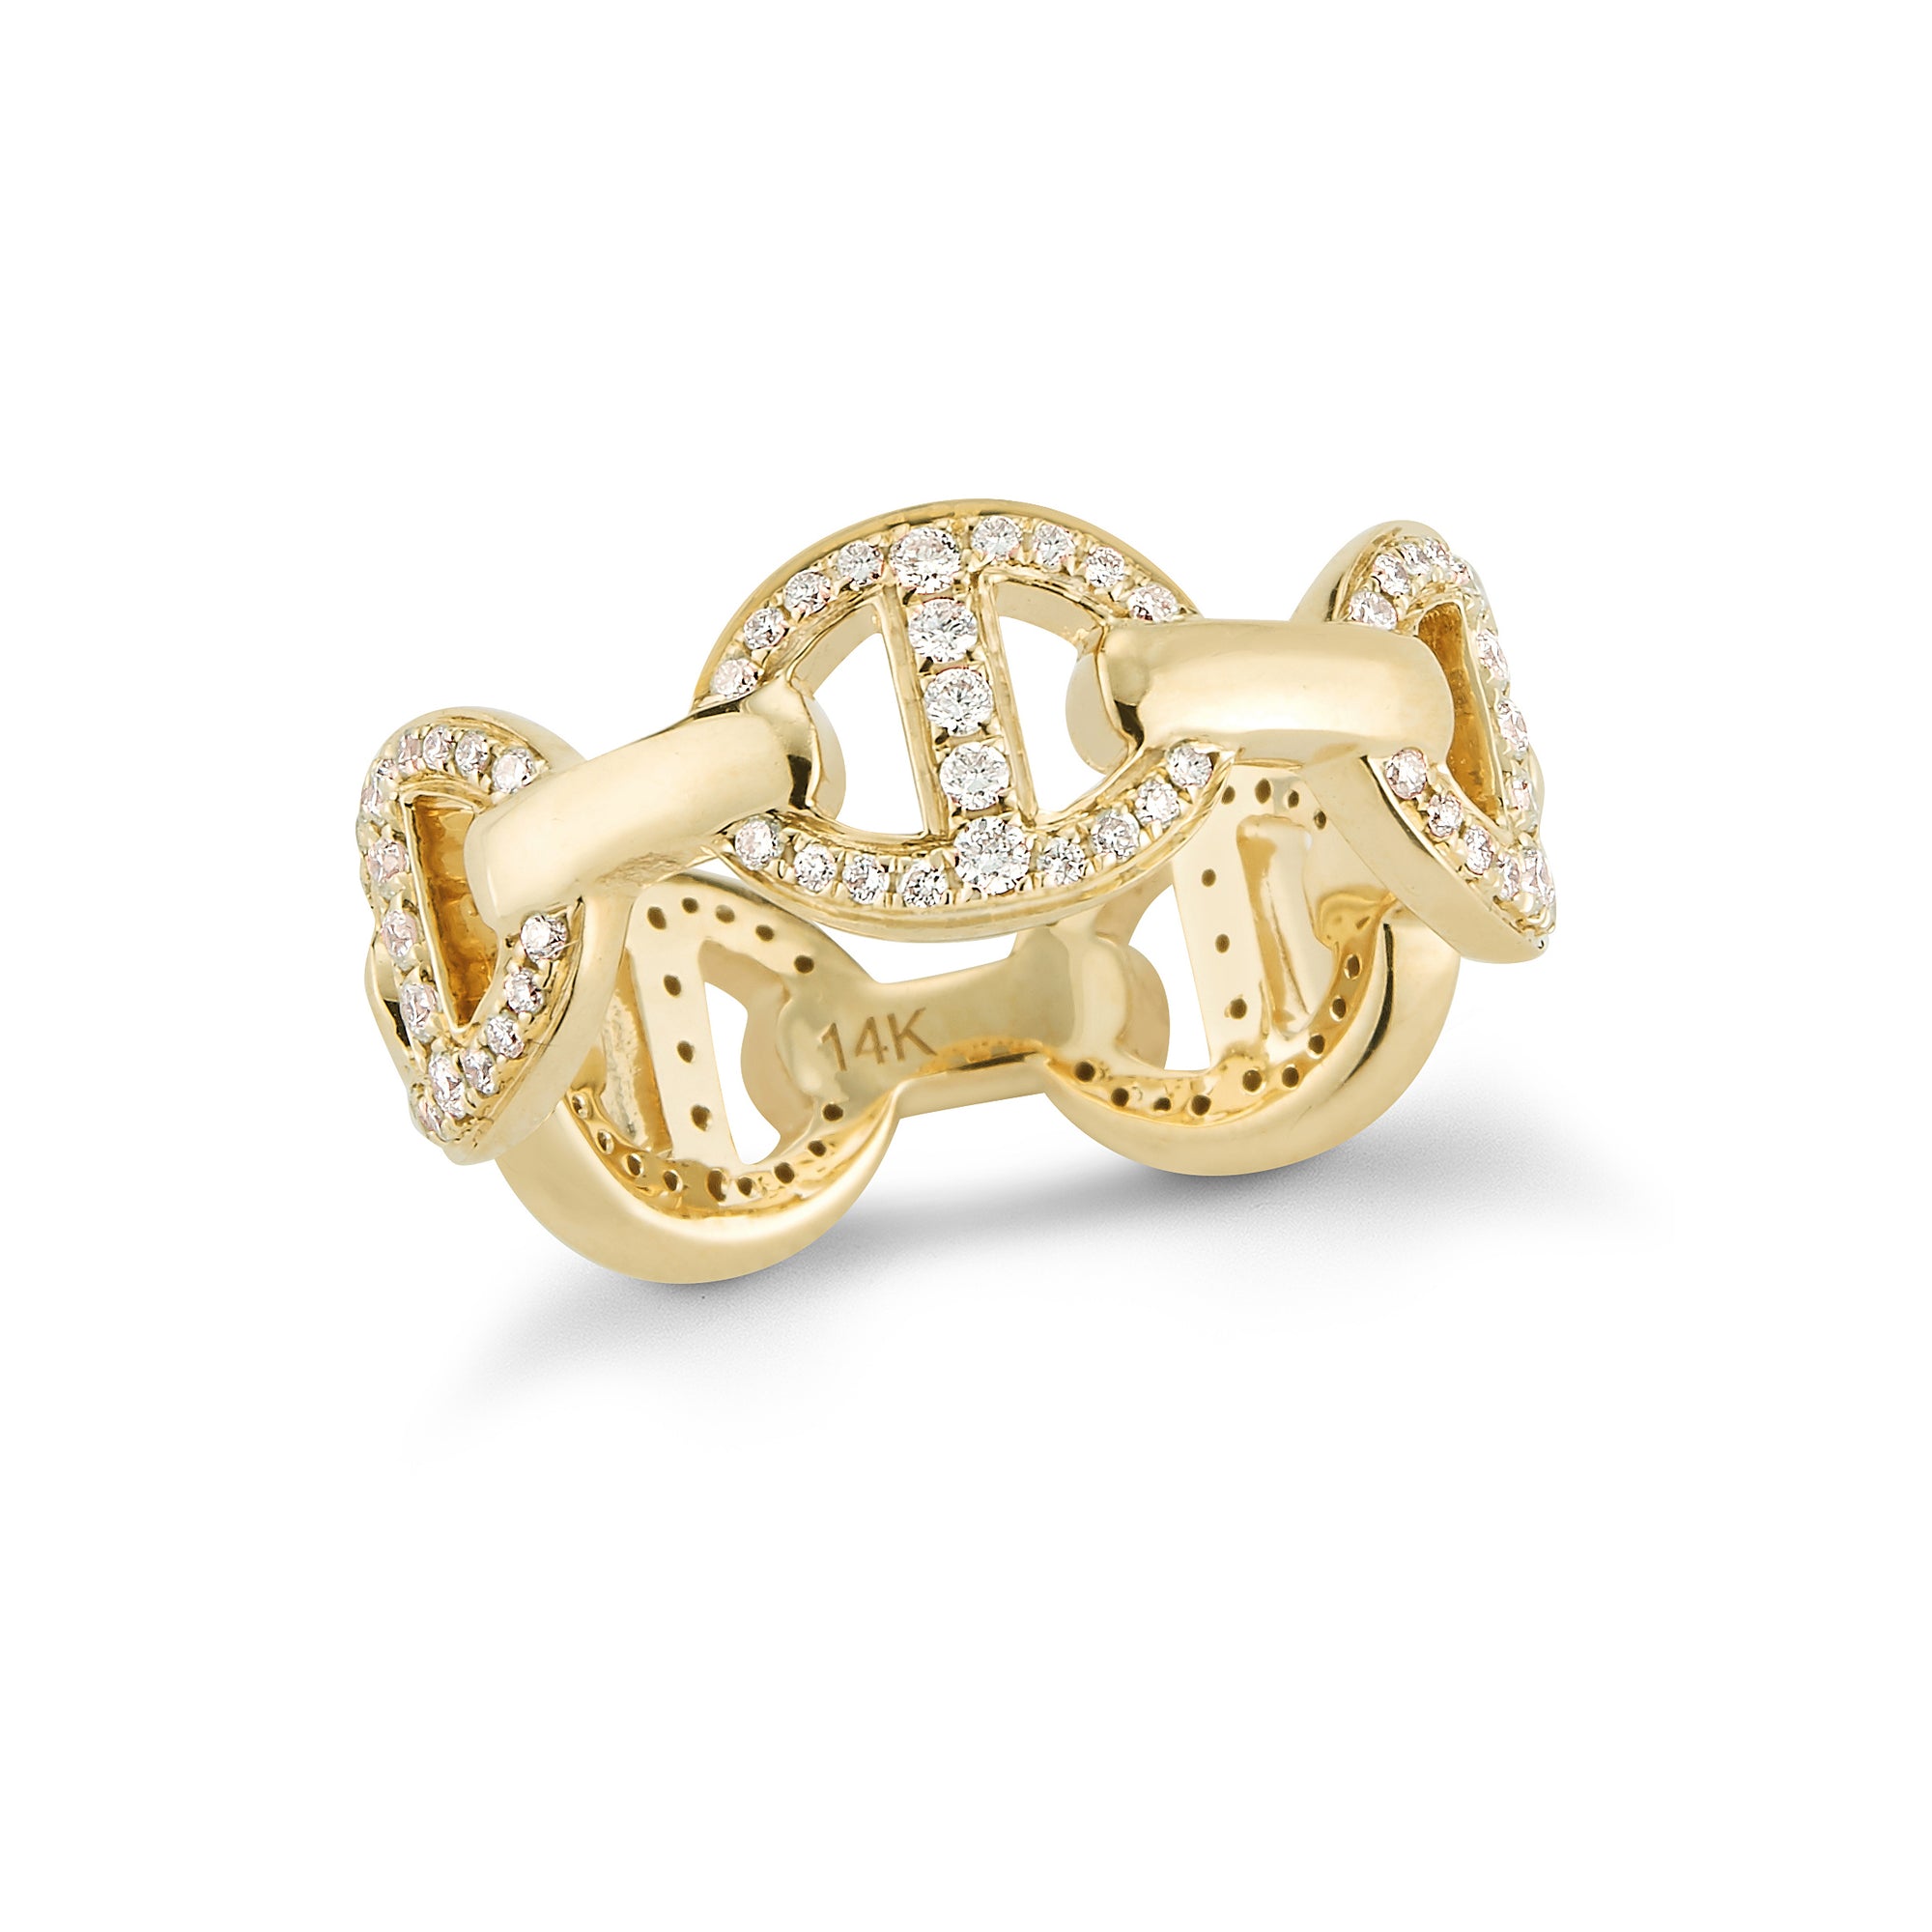 Diamond Chain Link Ring  14k gold, 5.49 grams, 105 round shared prong-set diamonds .46 carats.  Size width 8 millimeters.